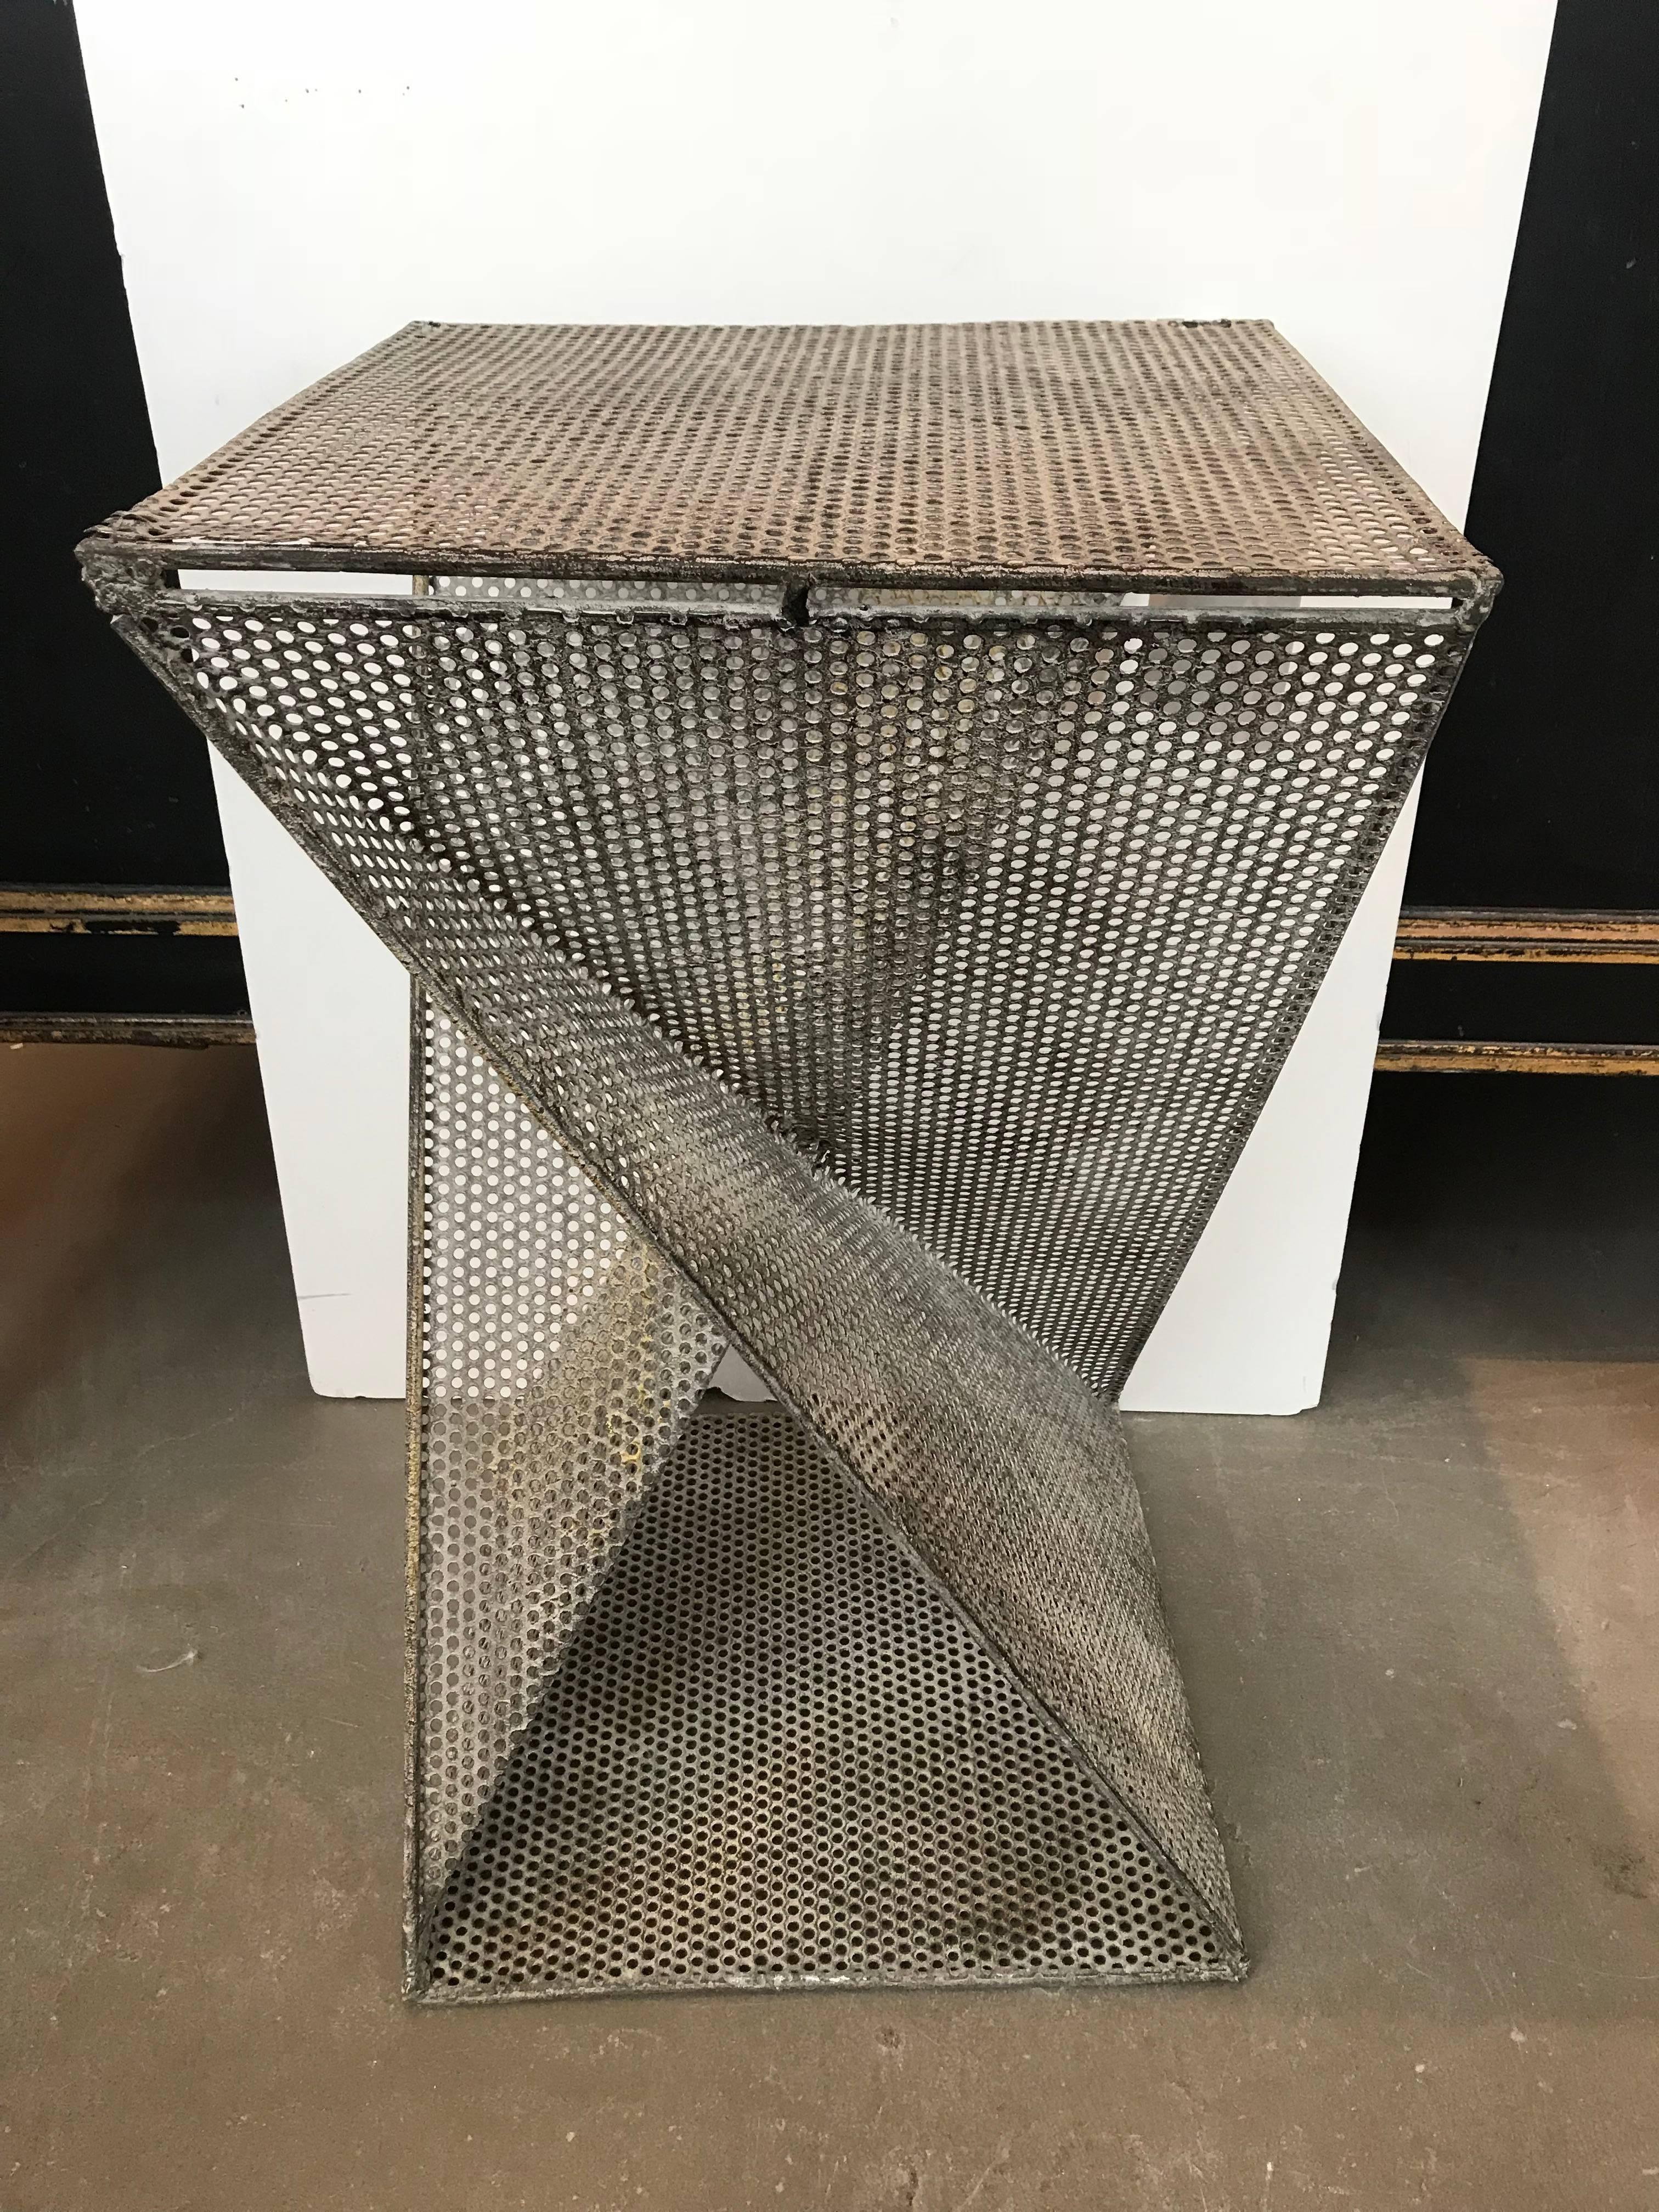 21st Century Artisan Metal Table In Excellent Condition For Sale In Boston, MA